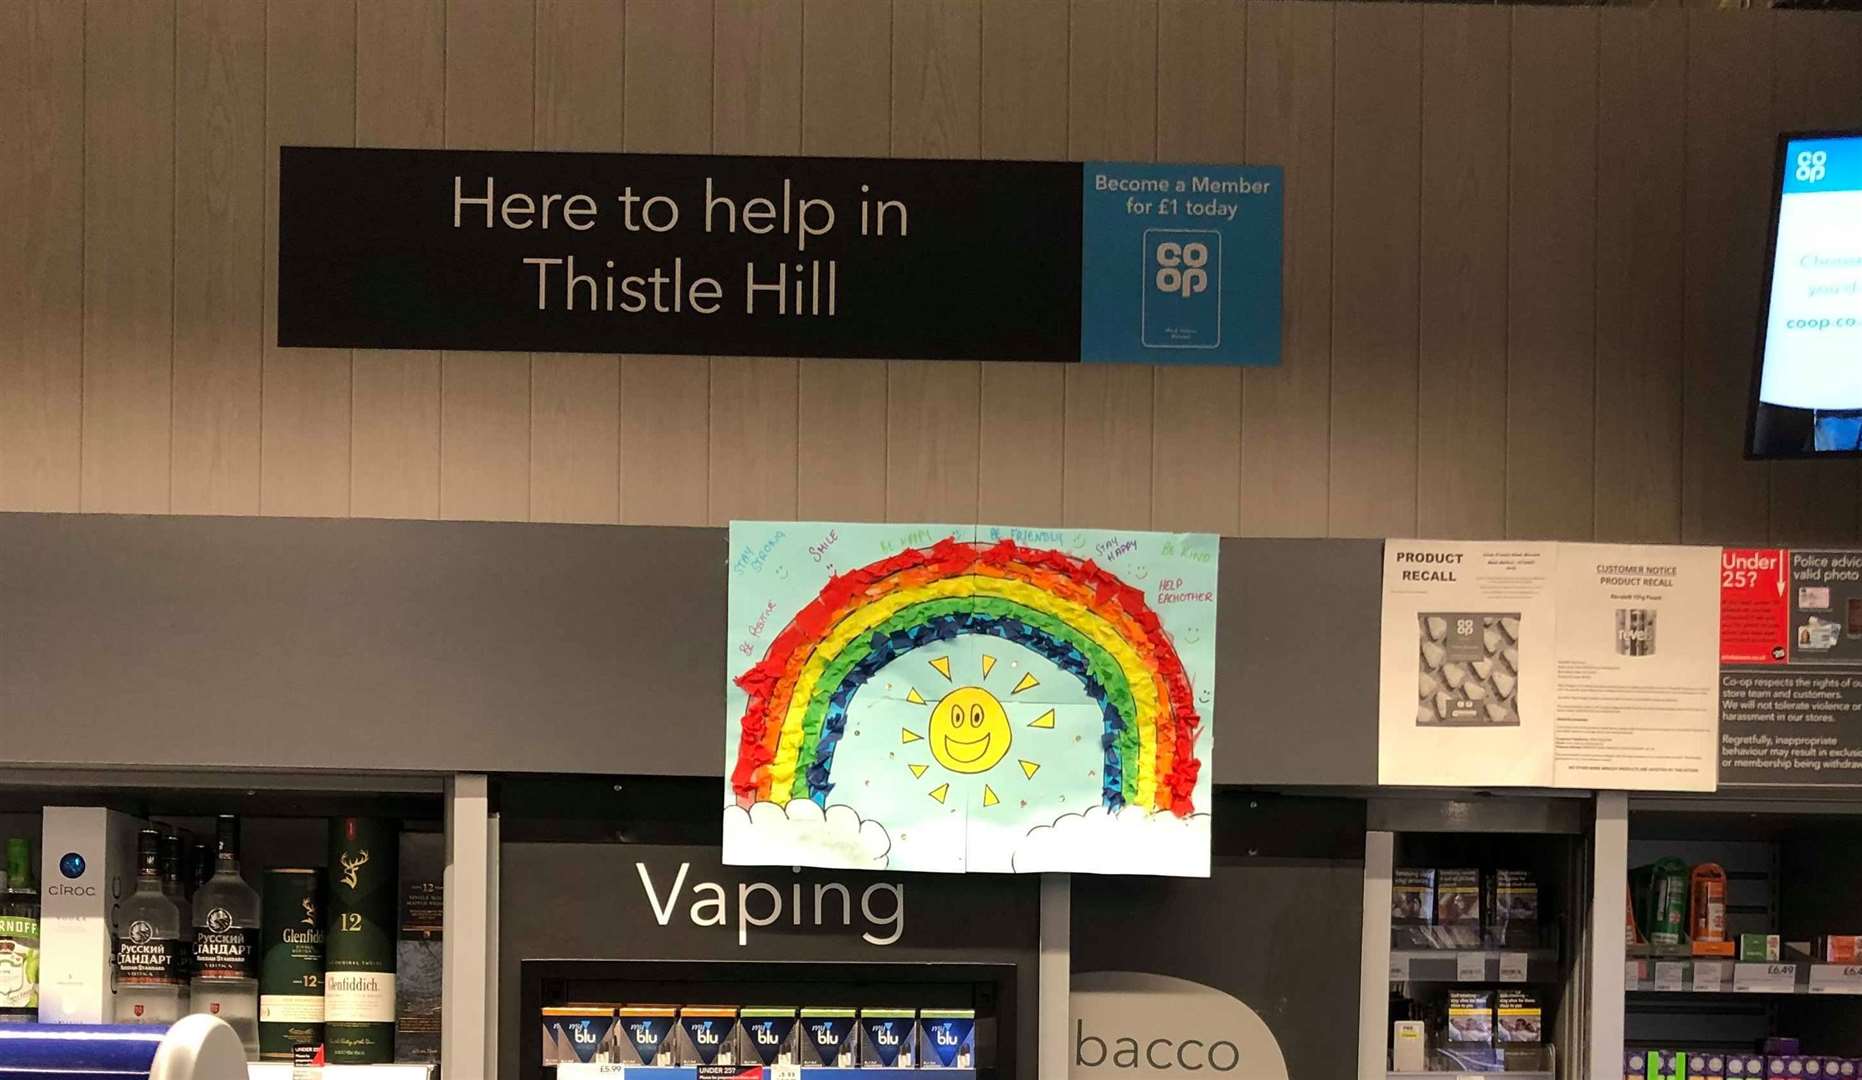 Tasha Sedge put this rainbow up where she works in the Co-op shop at Thistle Hill, Minster